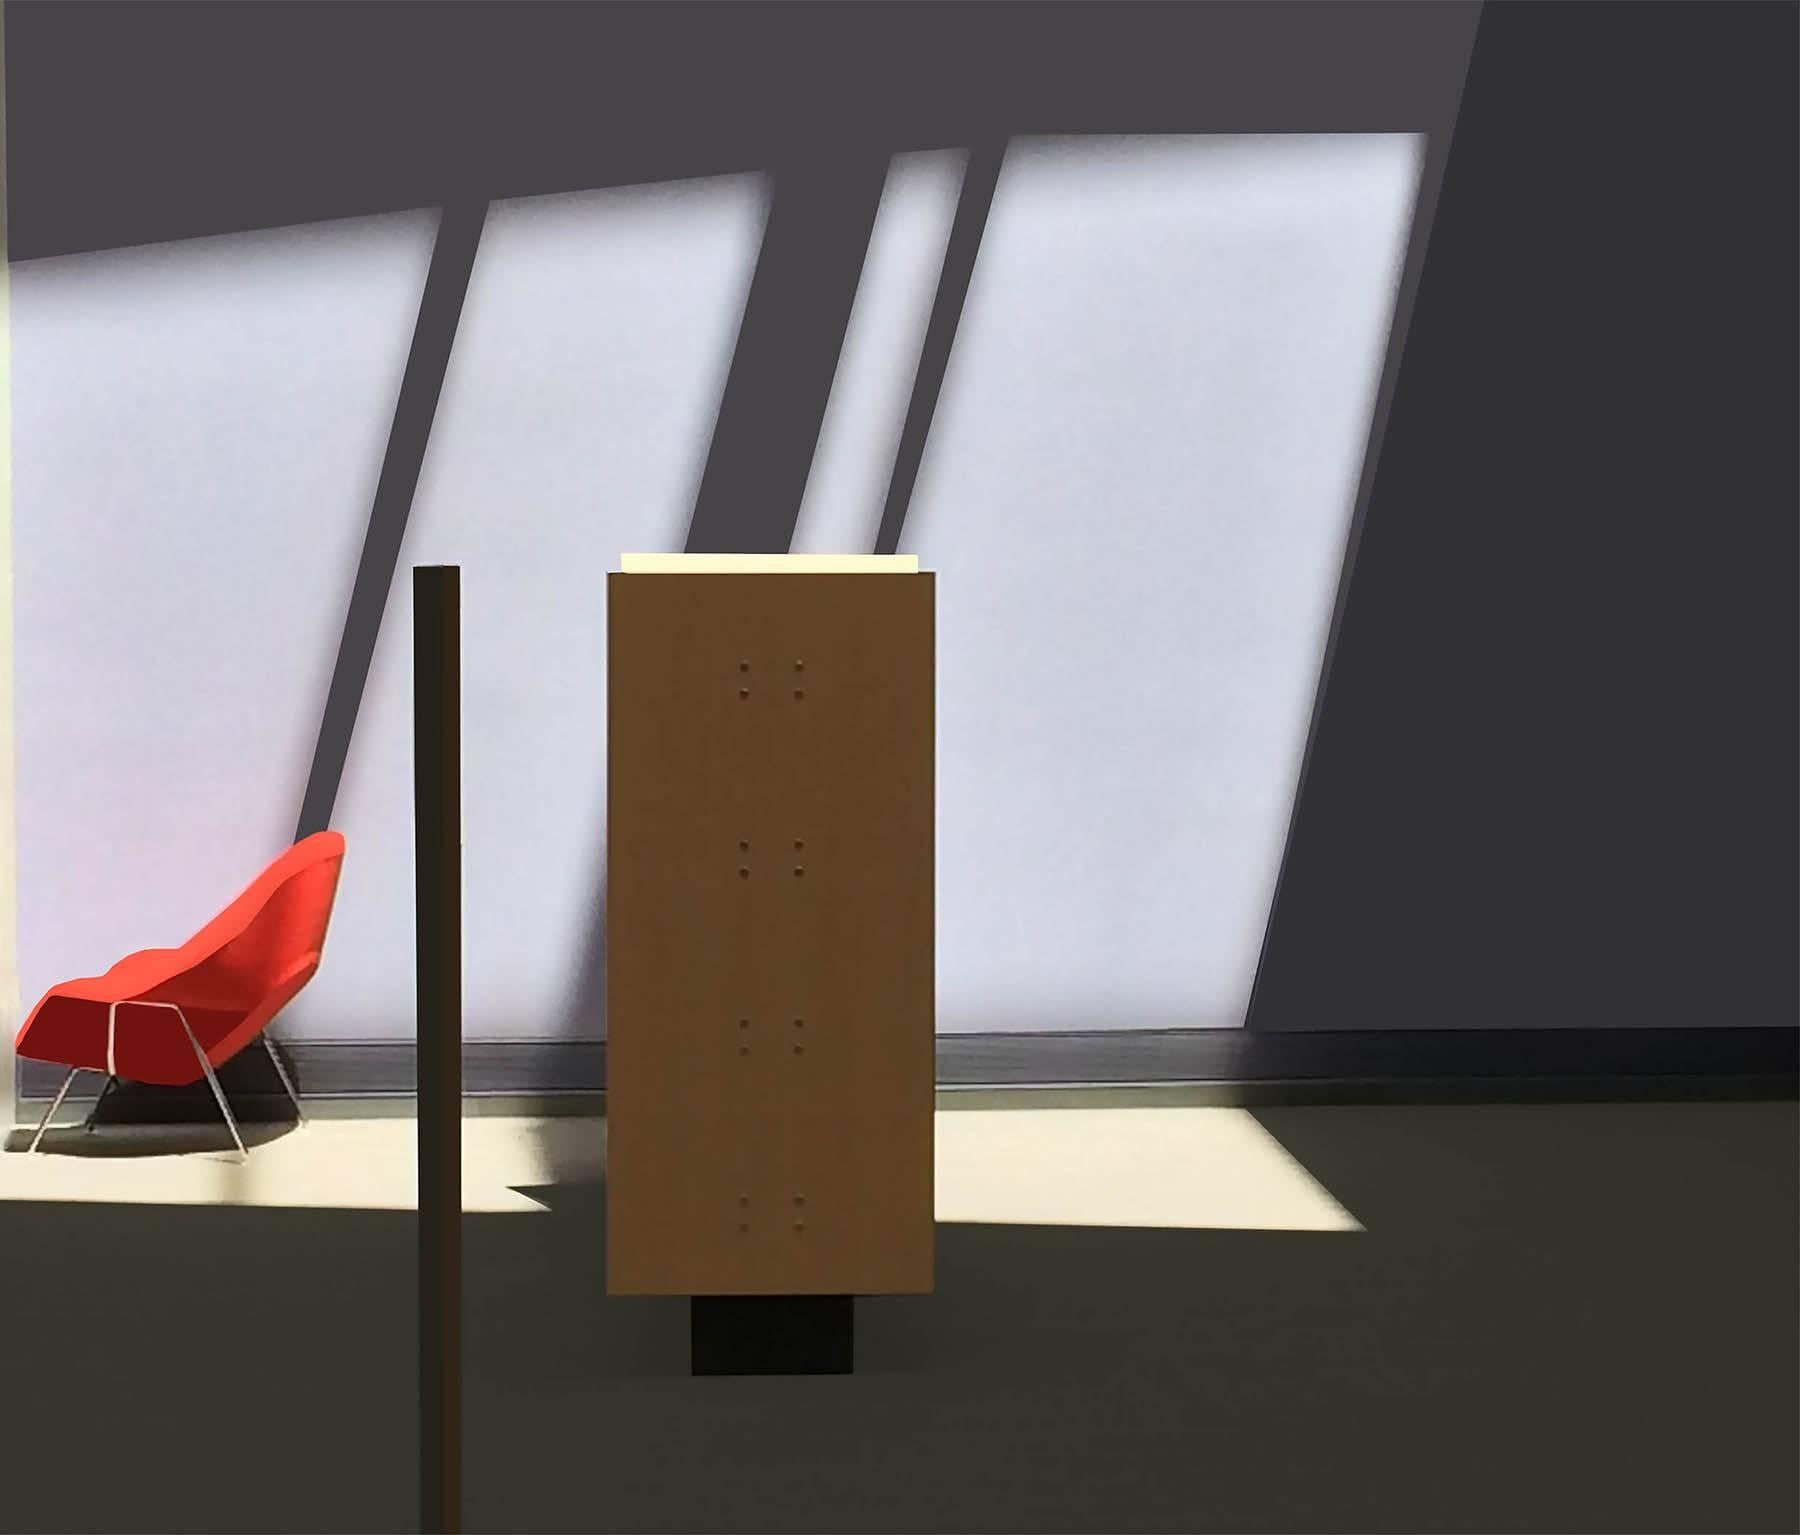 Stephanie Blumenthal Color Photograph - Red Chair (Modern Abstract Inkjet Print of Minimalist Interior in Black Frame)